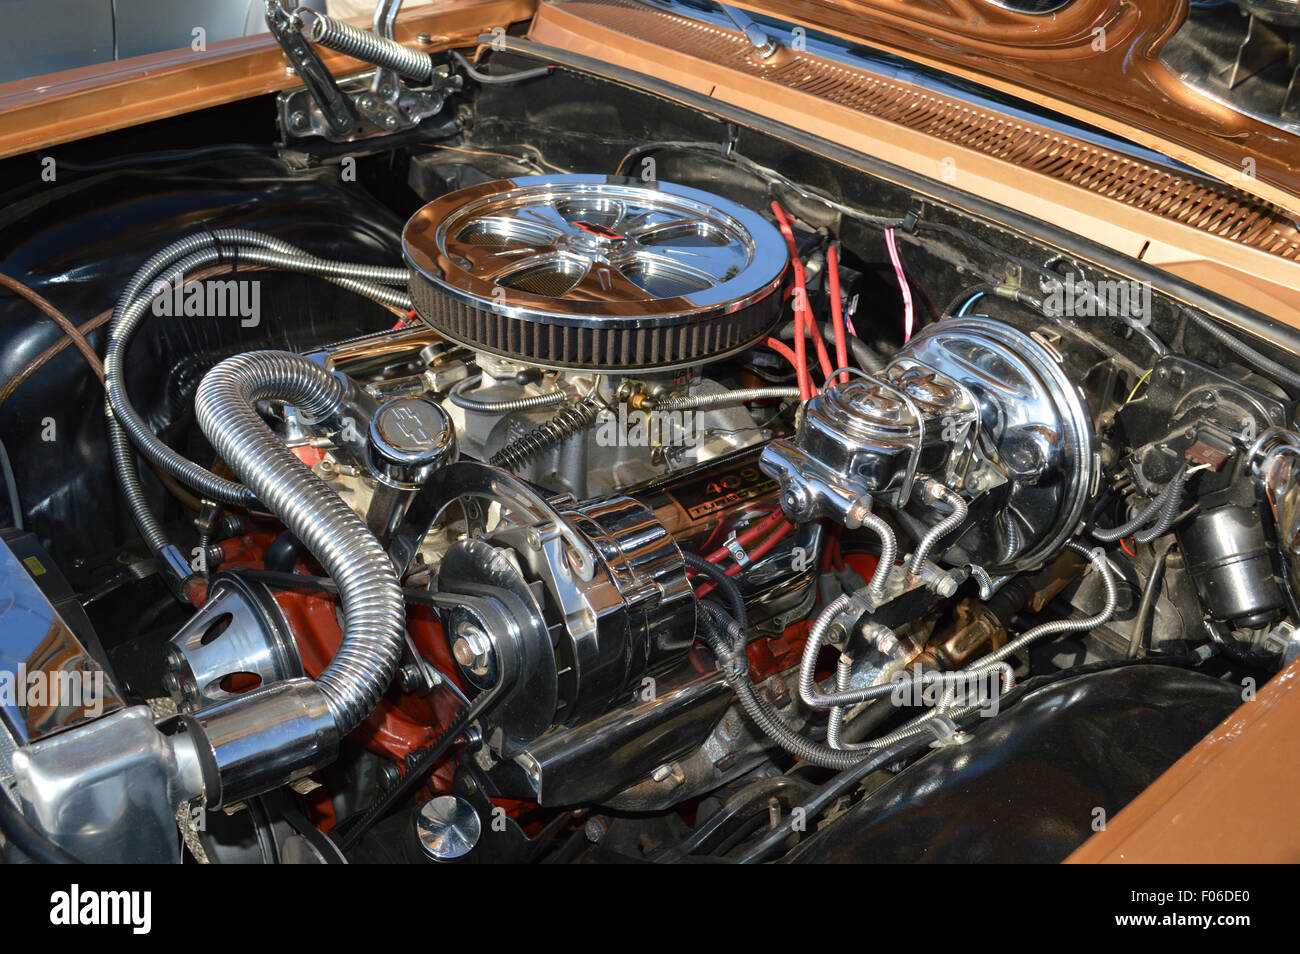 A 409cid Chevrolet Engine made famous by the Beach Boys song. Stock Photo